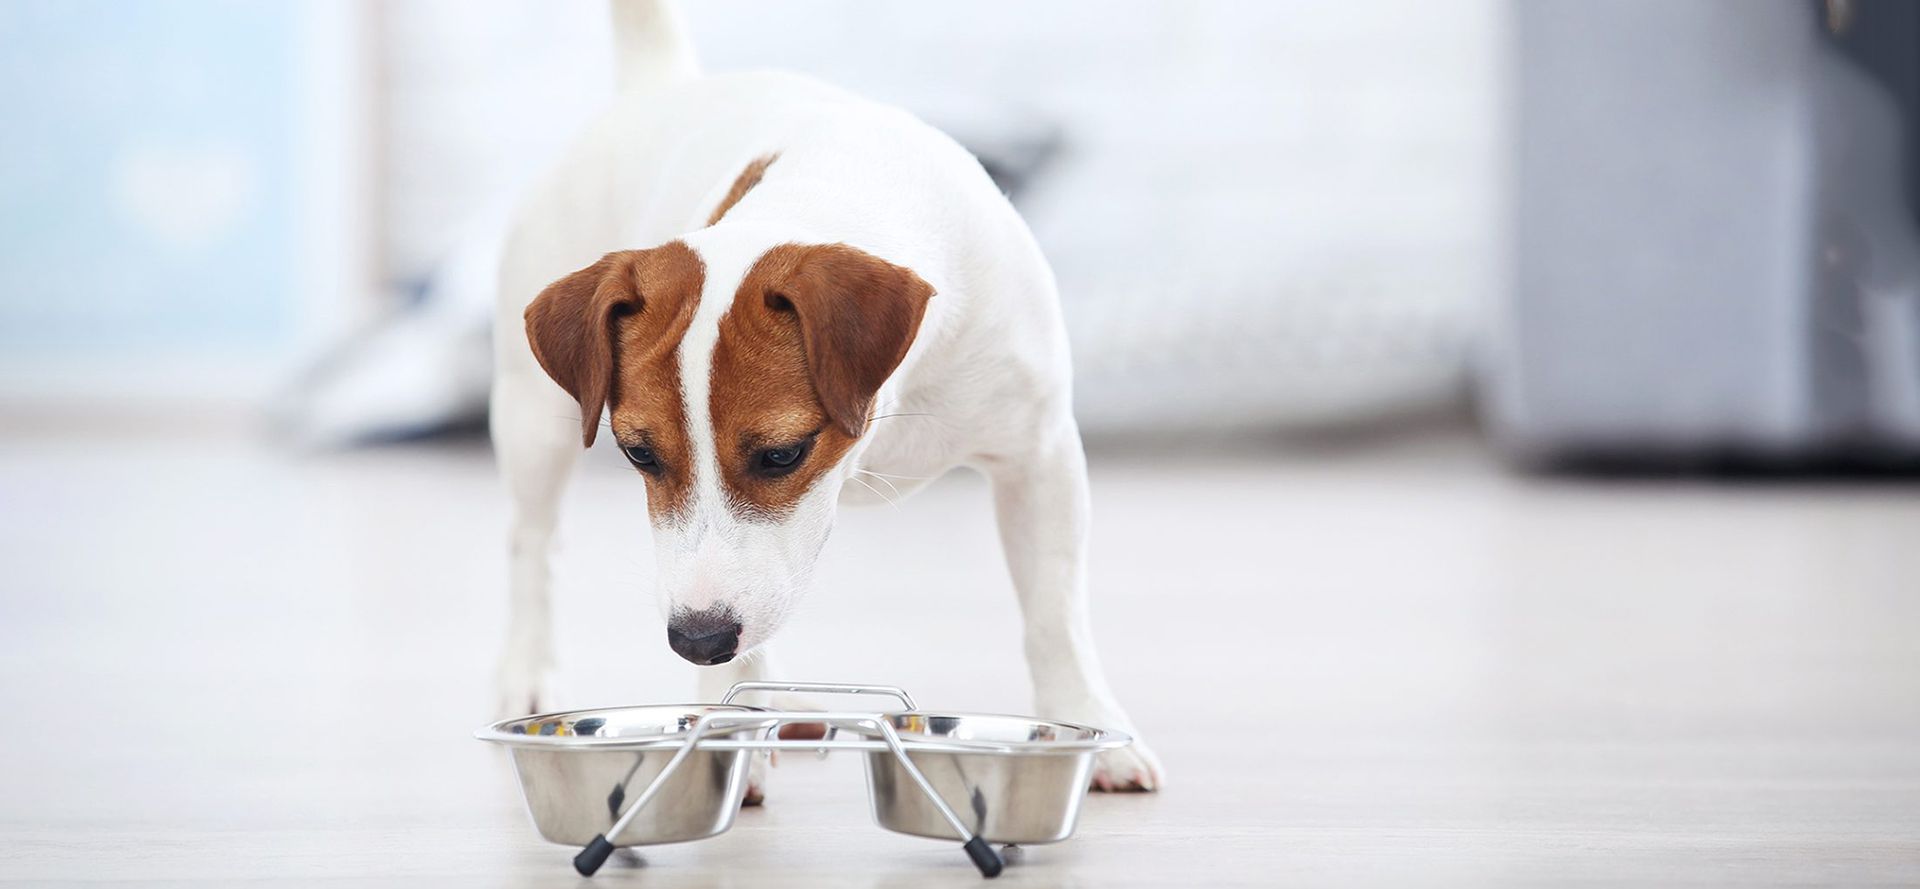 Jack Russell Terrier eating from a bowl.